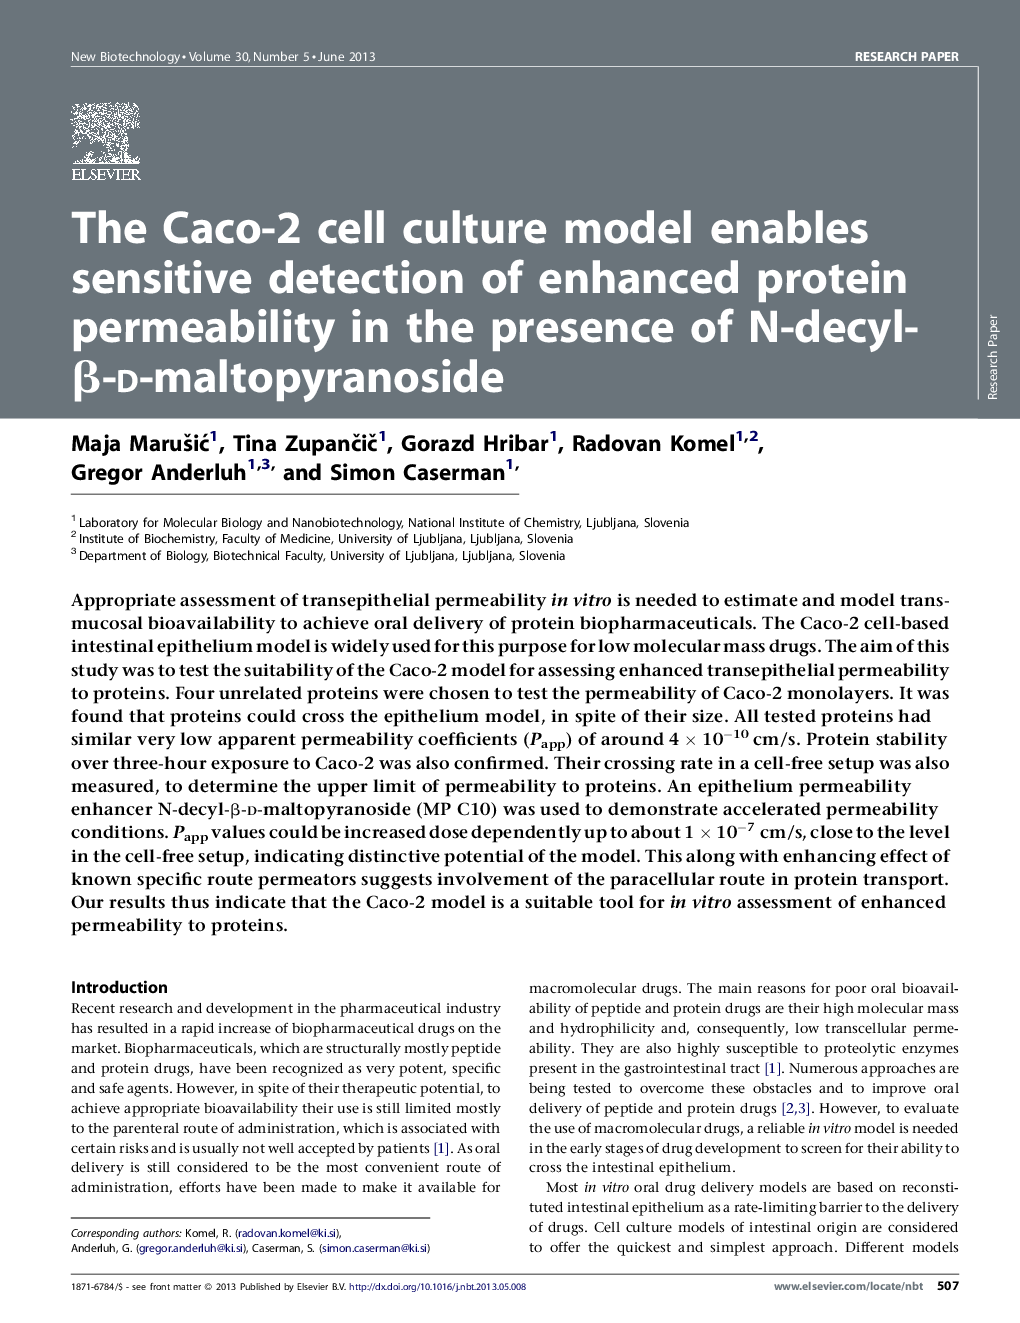 The Caco-2 cell culture model enables sensitive detection of enhanced protein permeability in the presence of N-decyl-β-d-maltopyranoside